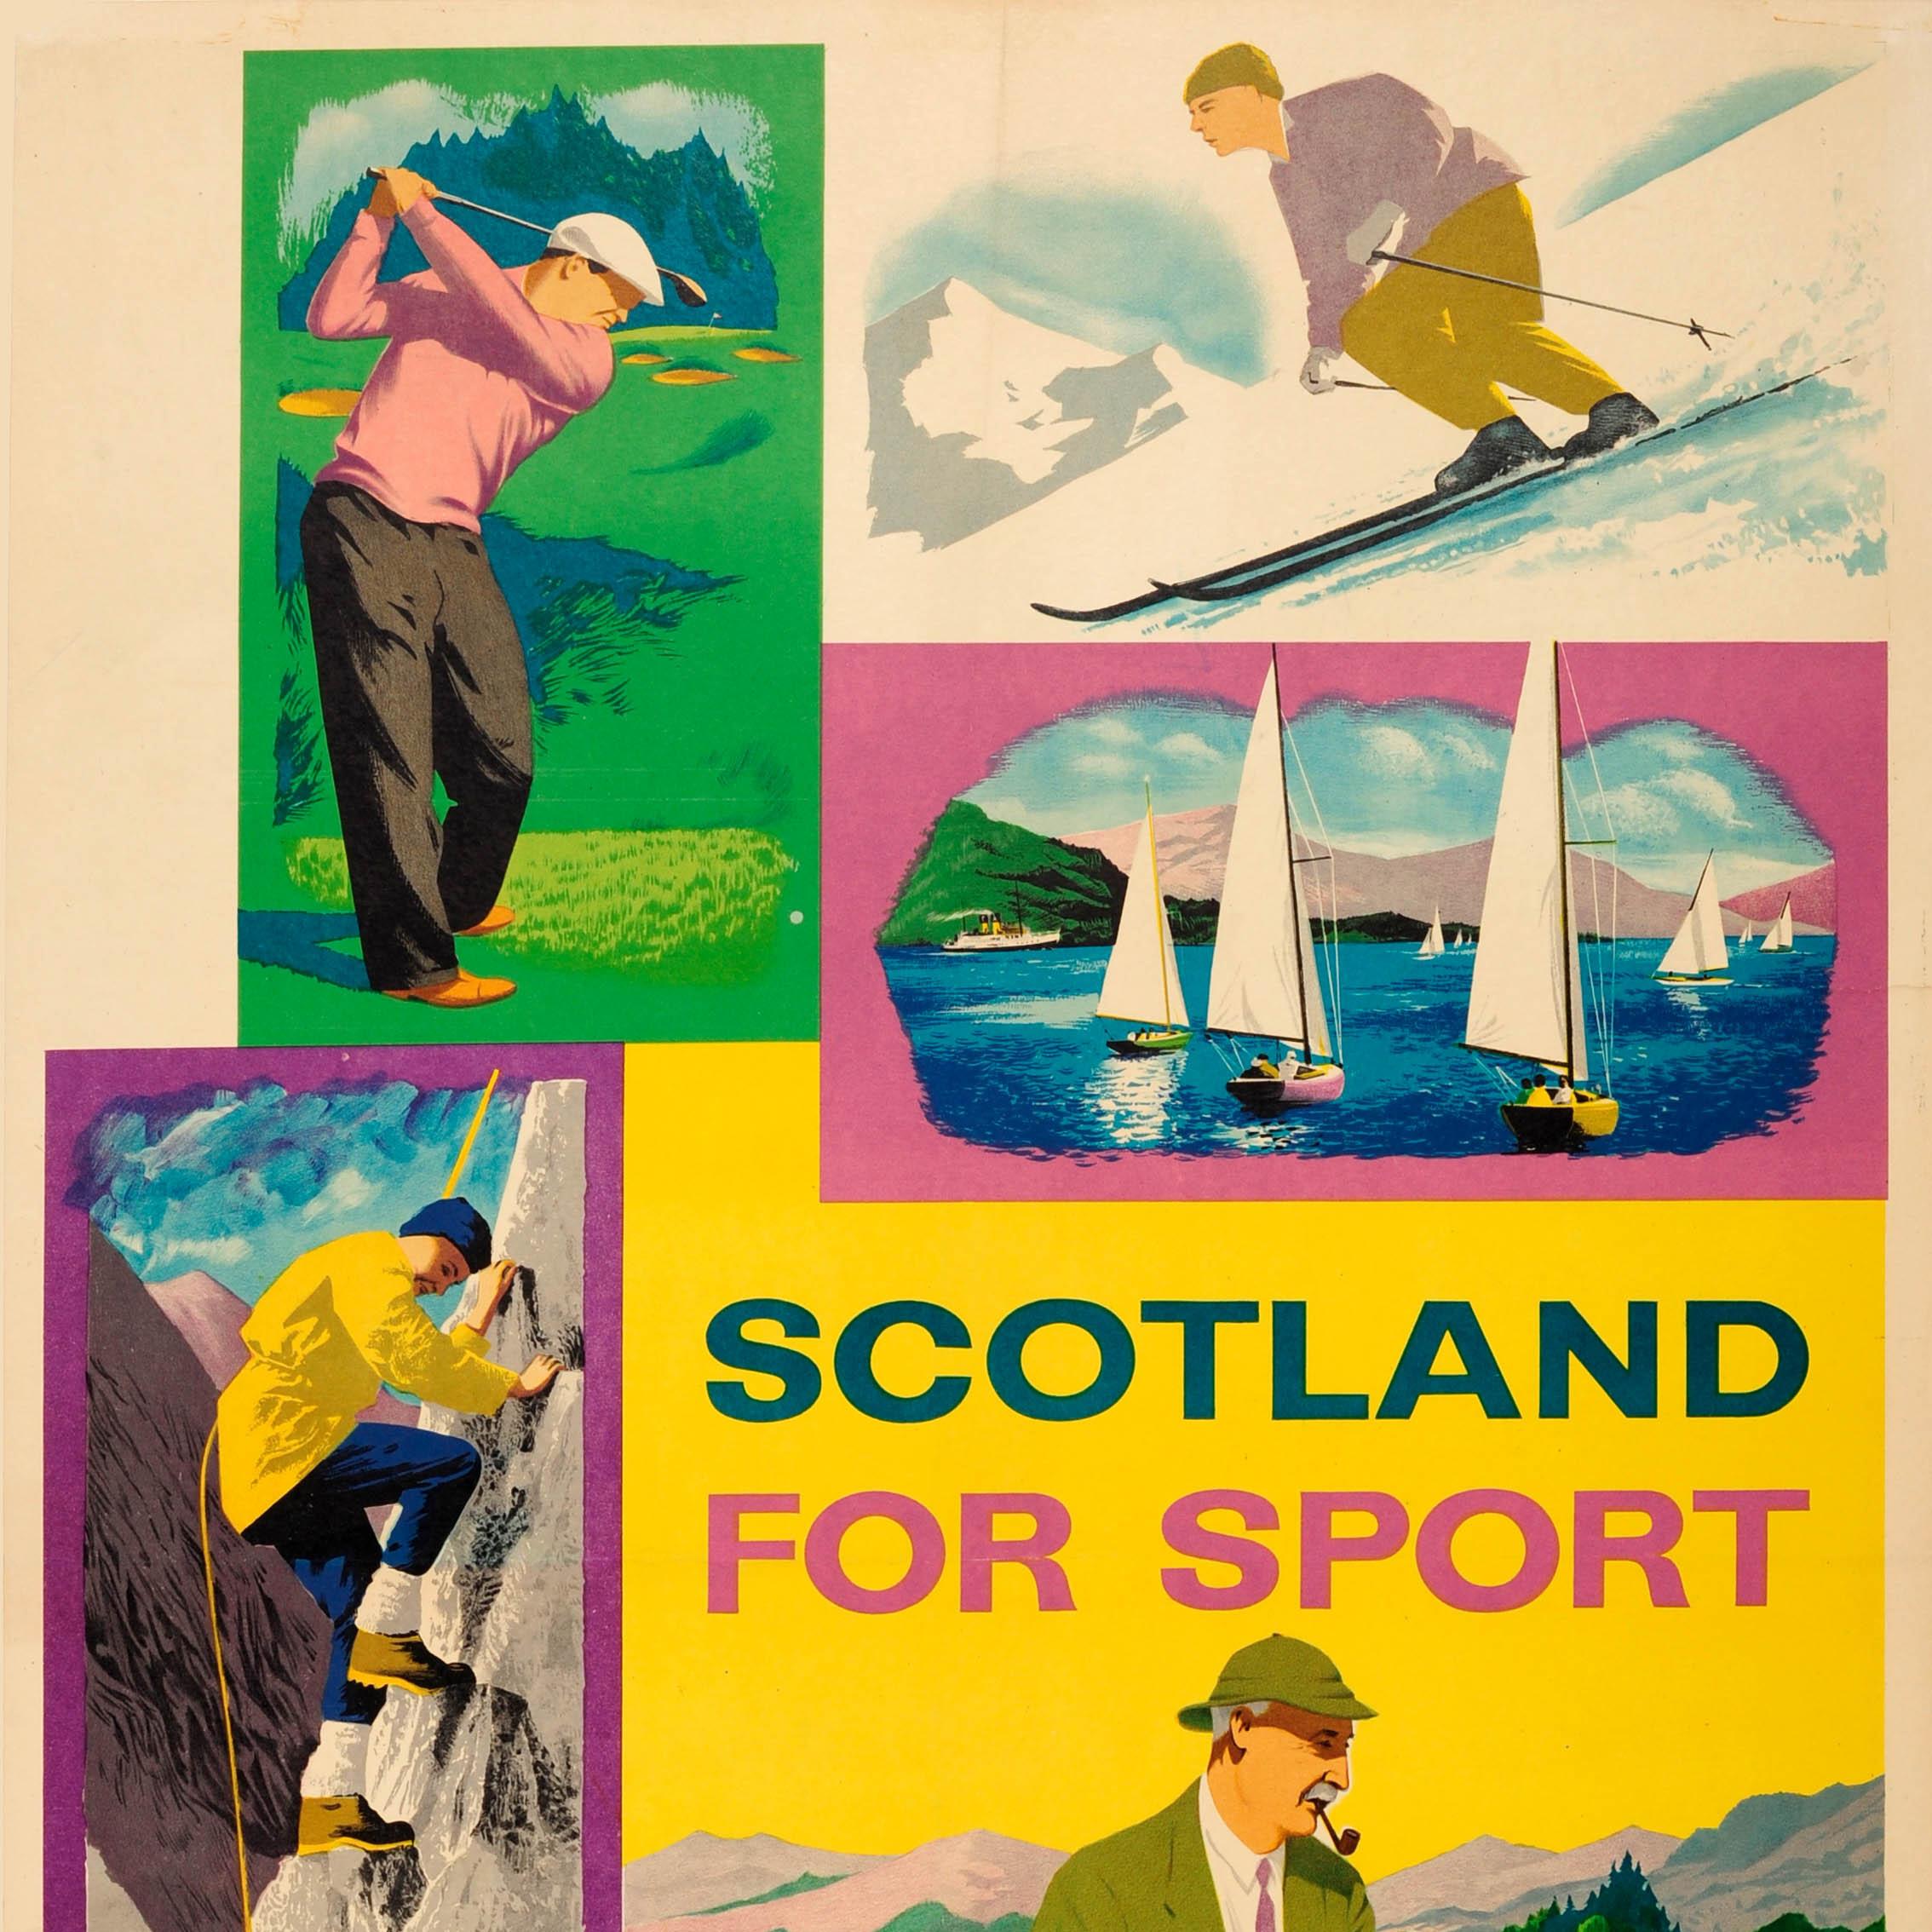 Original Vintage Scotland For Sport British Railways Poster: Golf Skiing Sailing In Good Condition For Sale In London, GB